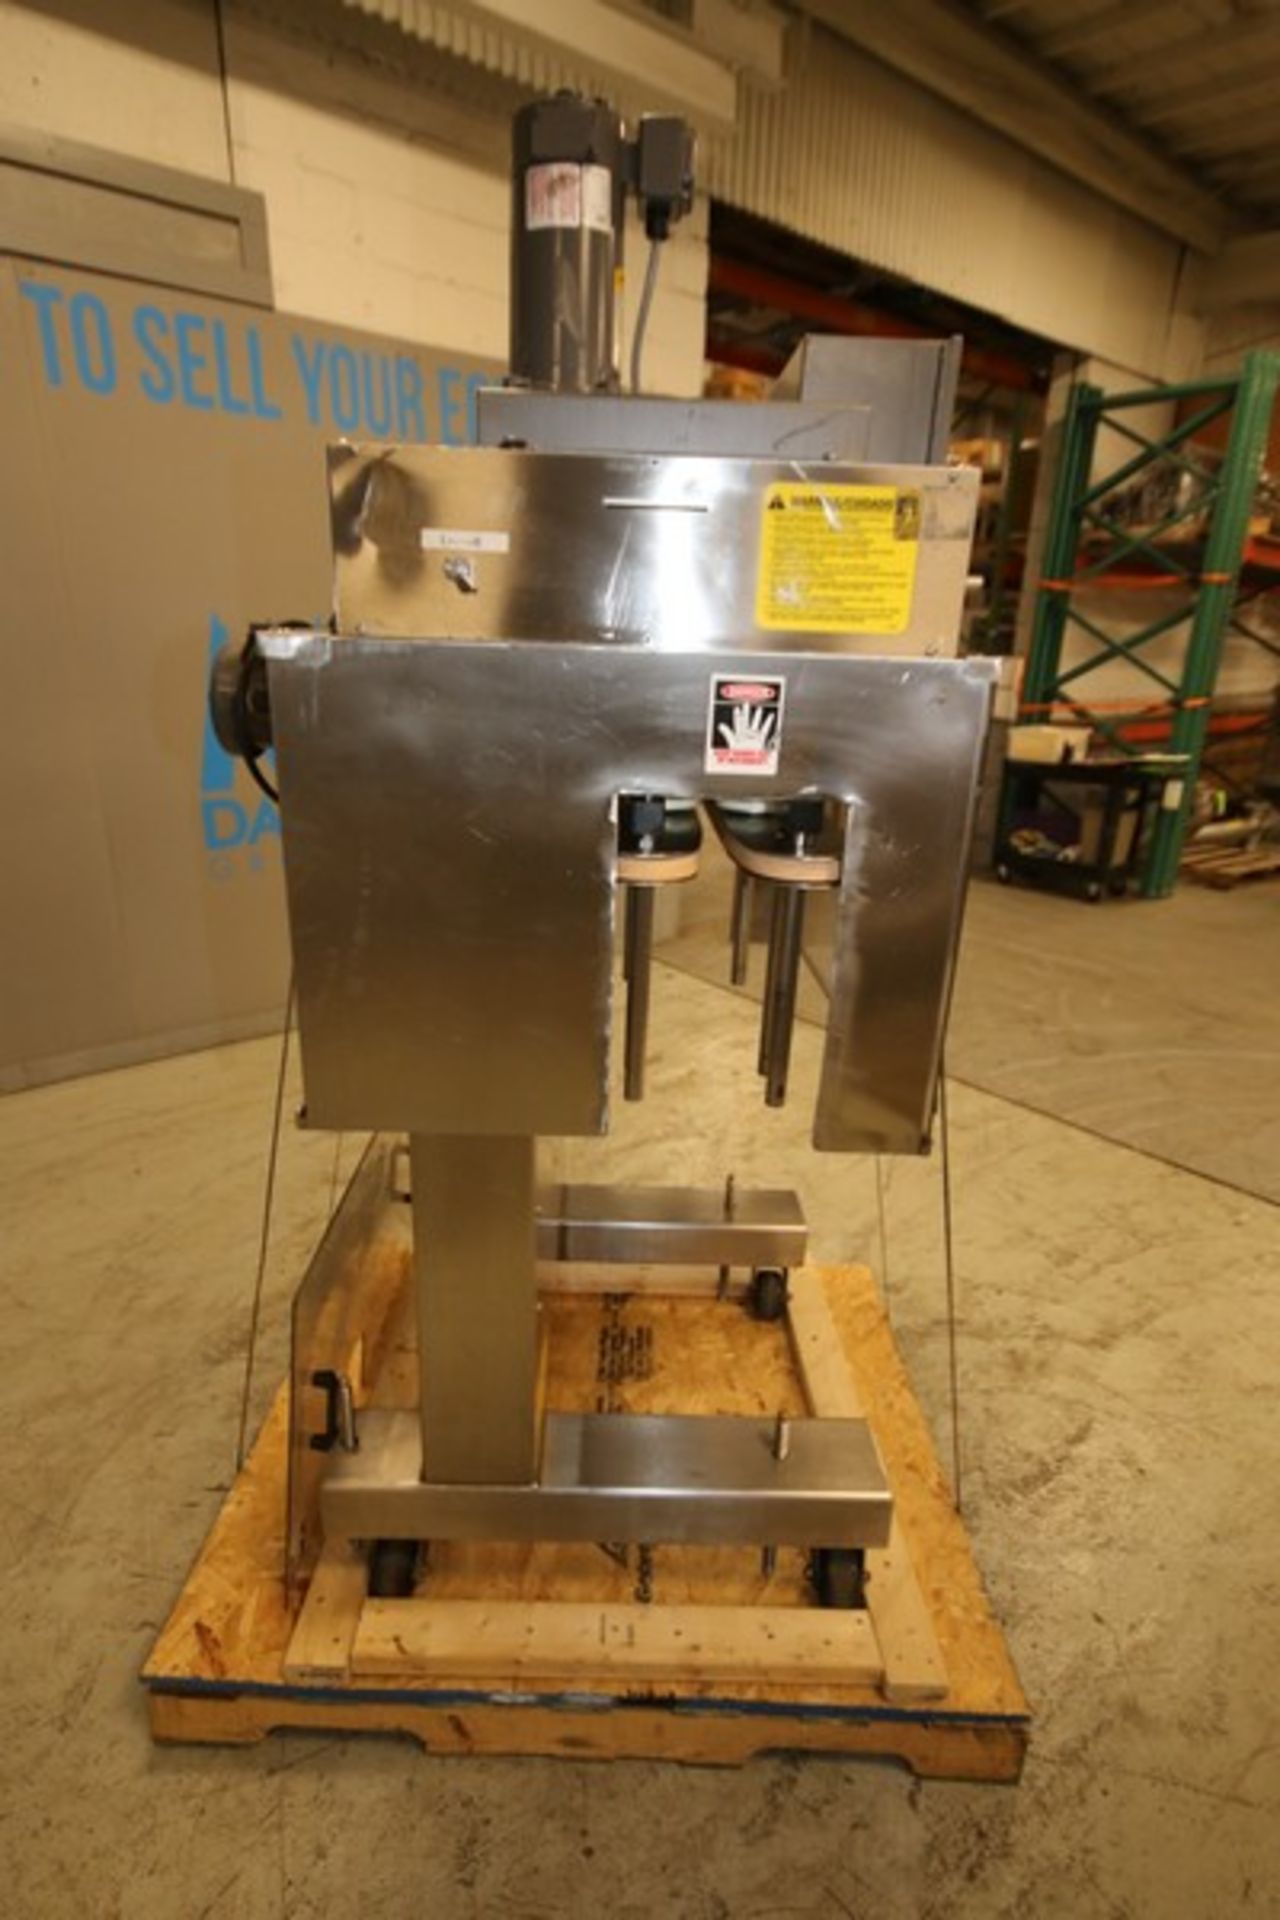 Kaps - All In Line S/S Capper, Model FE4-R, SN 4912, with 4 - Heads, Controls, 110V (INV#101589) ( - Image 8 of 10